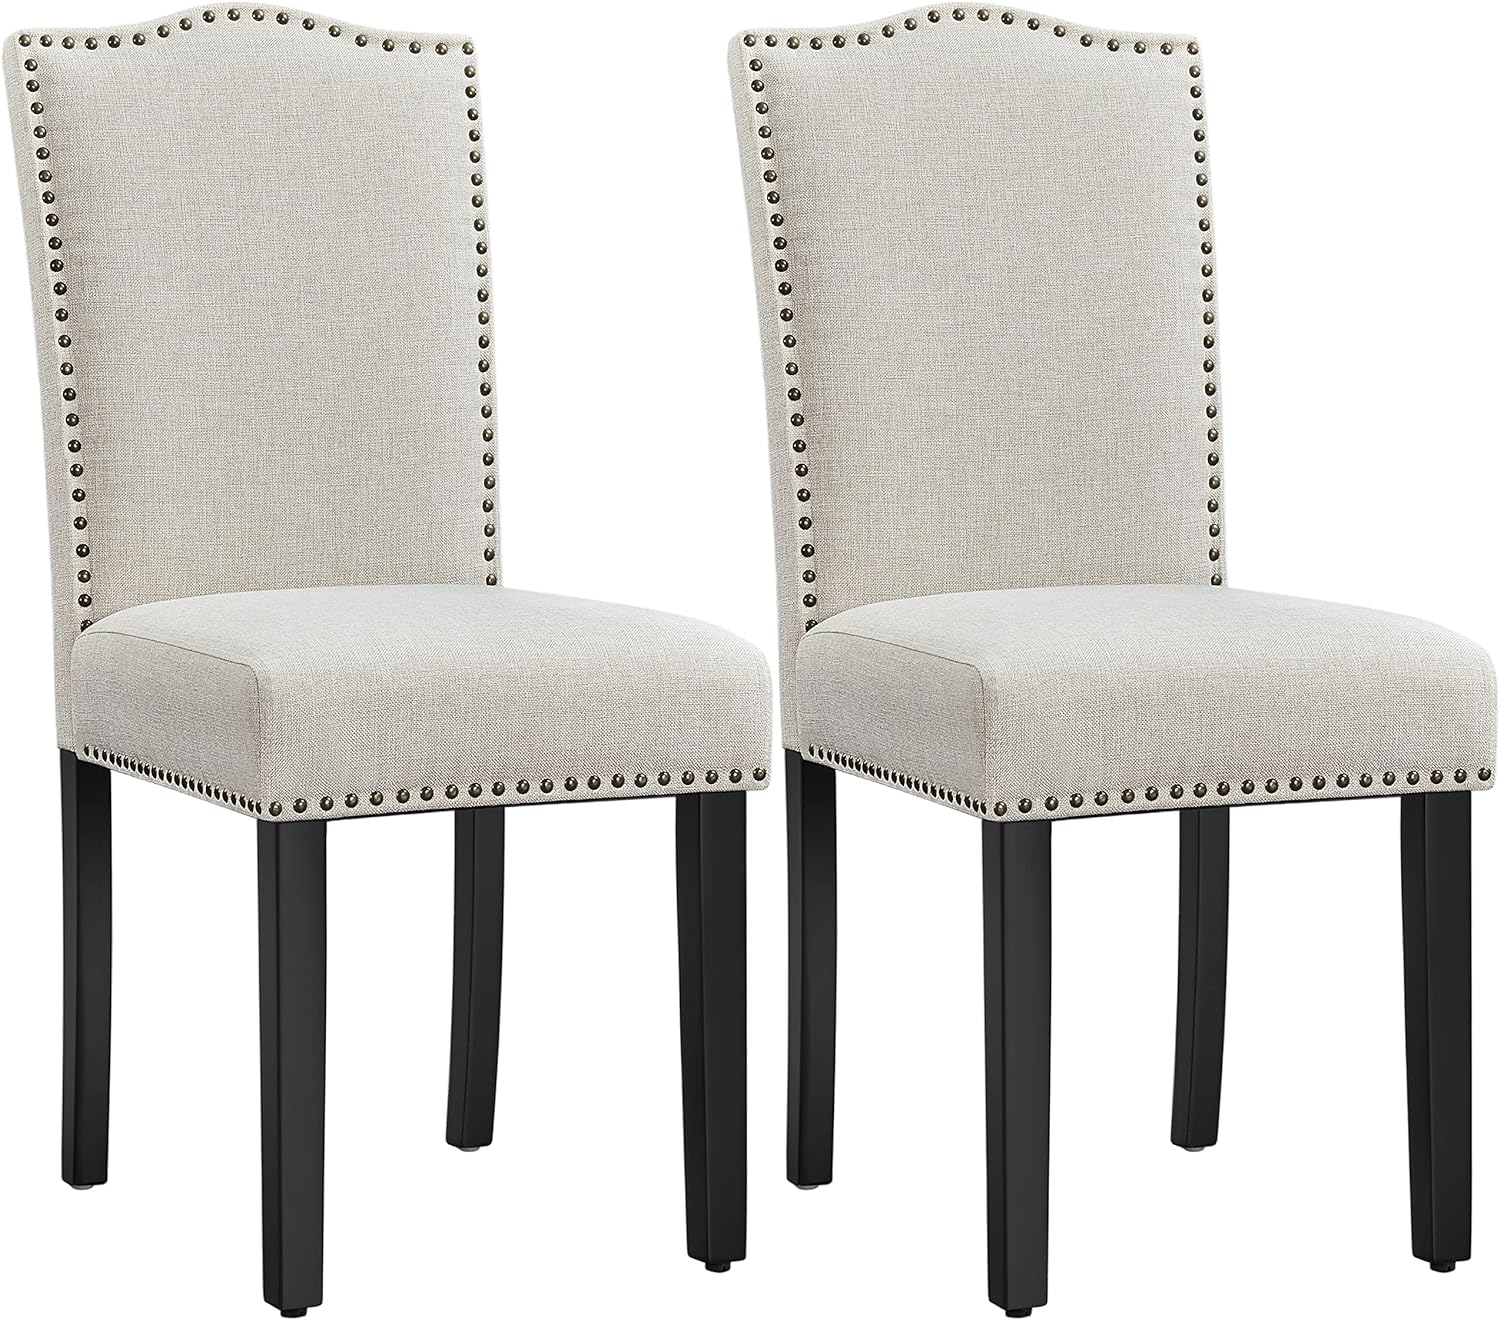 Yaheetech Dining Chairs Set of 2 Dining Room Chairs Kitchen Chairs with Solid Wood Legs and Padded Seat Dining Room Side Chair with Nailhead Trim for Home Kitchen Living Room, 1 Package